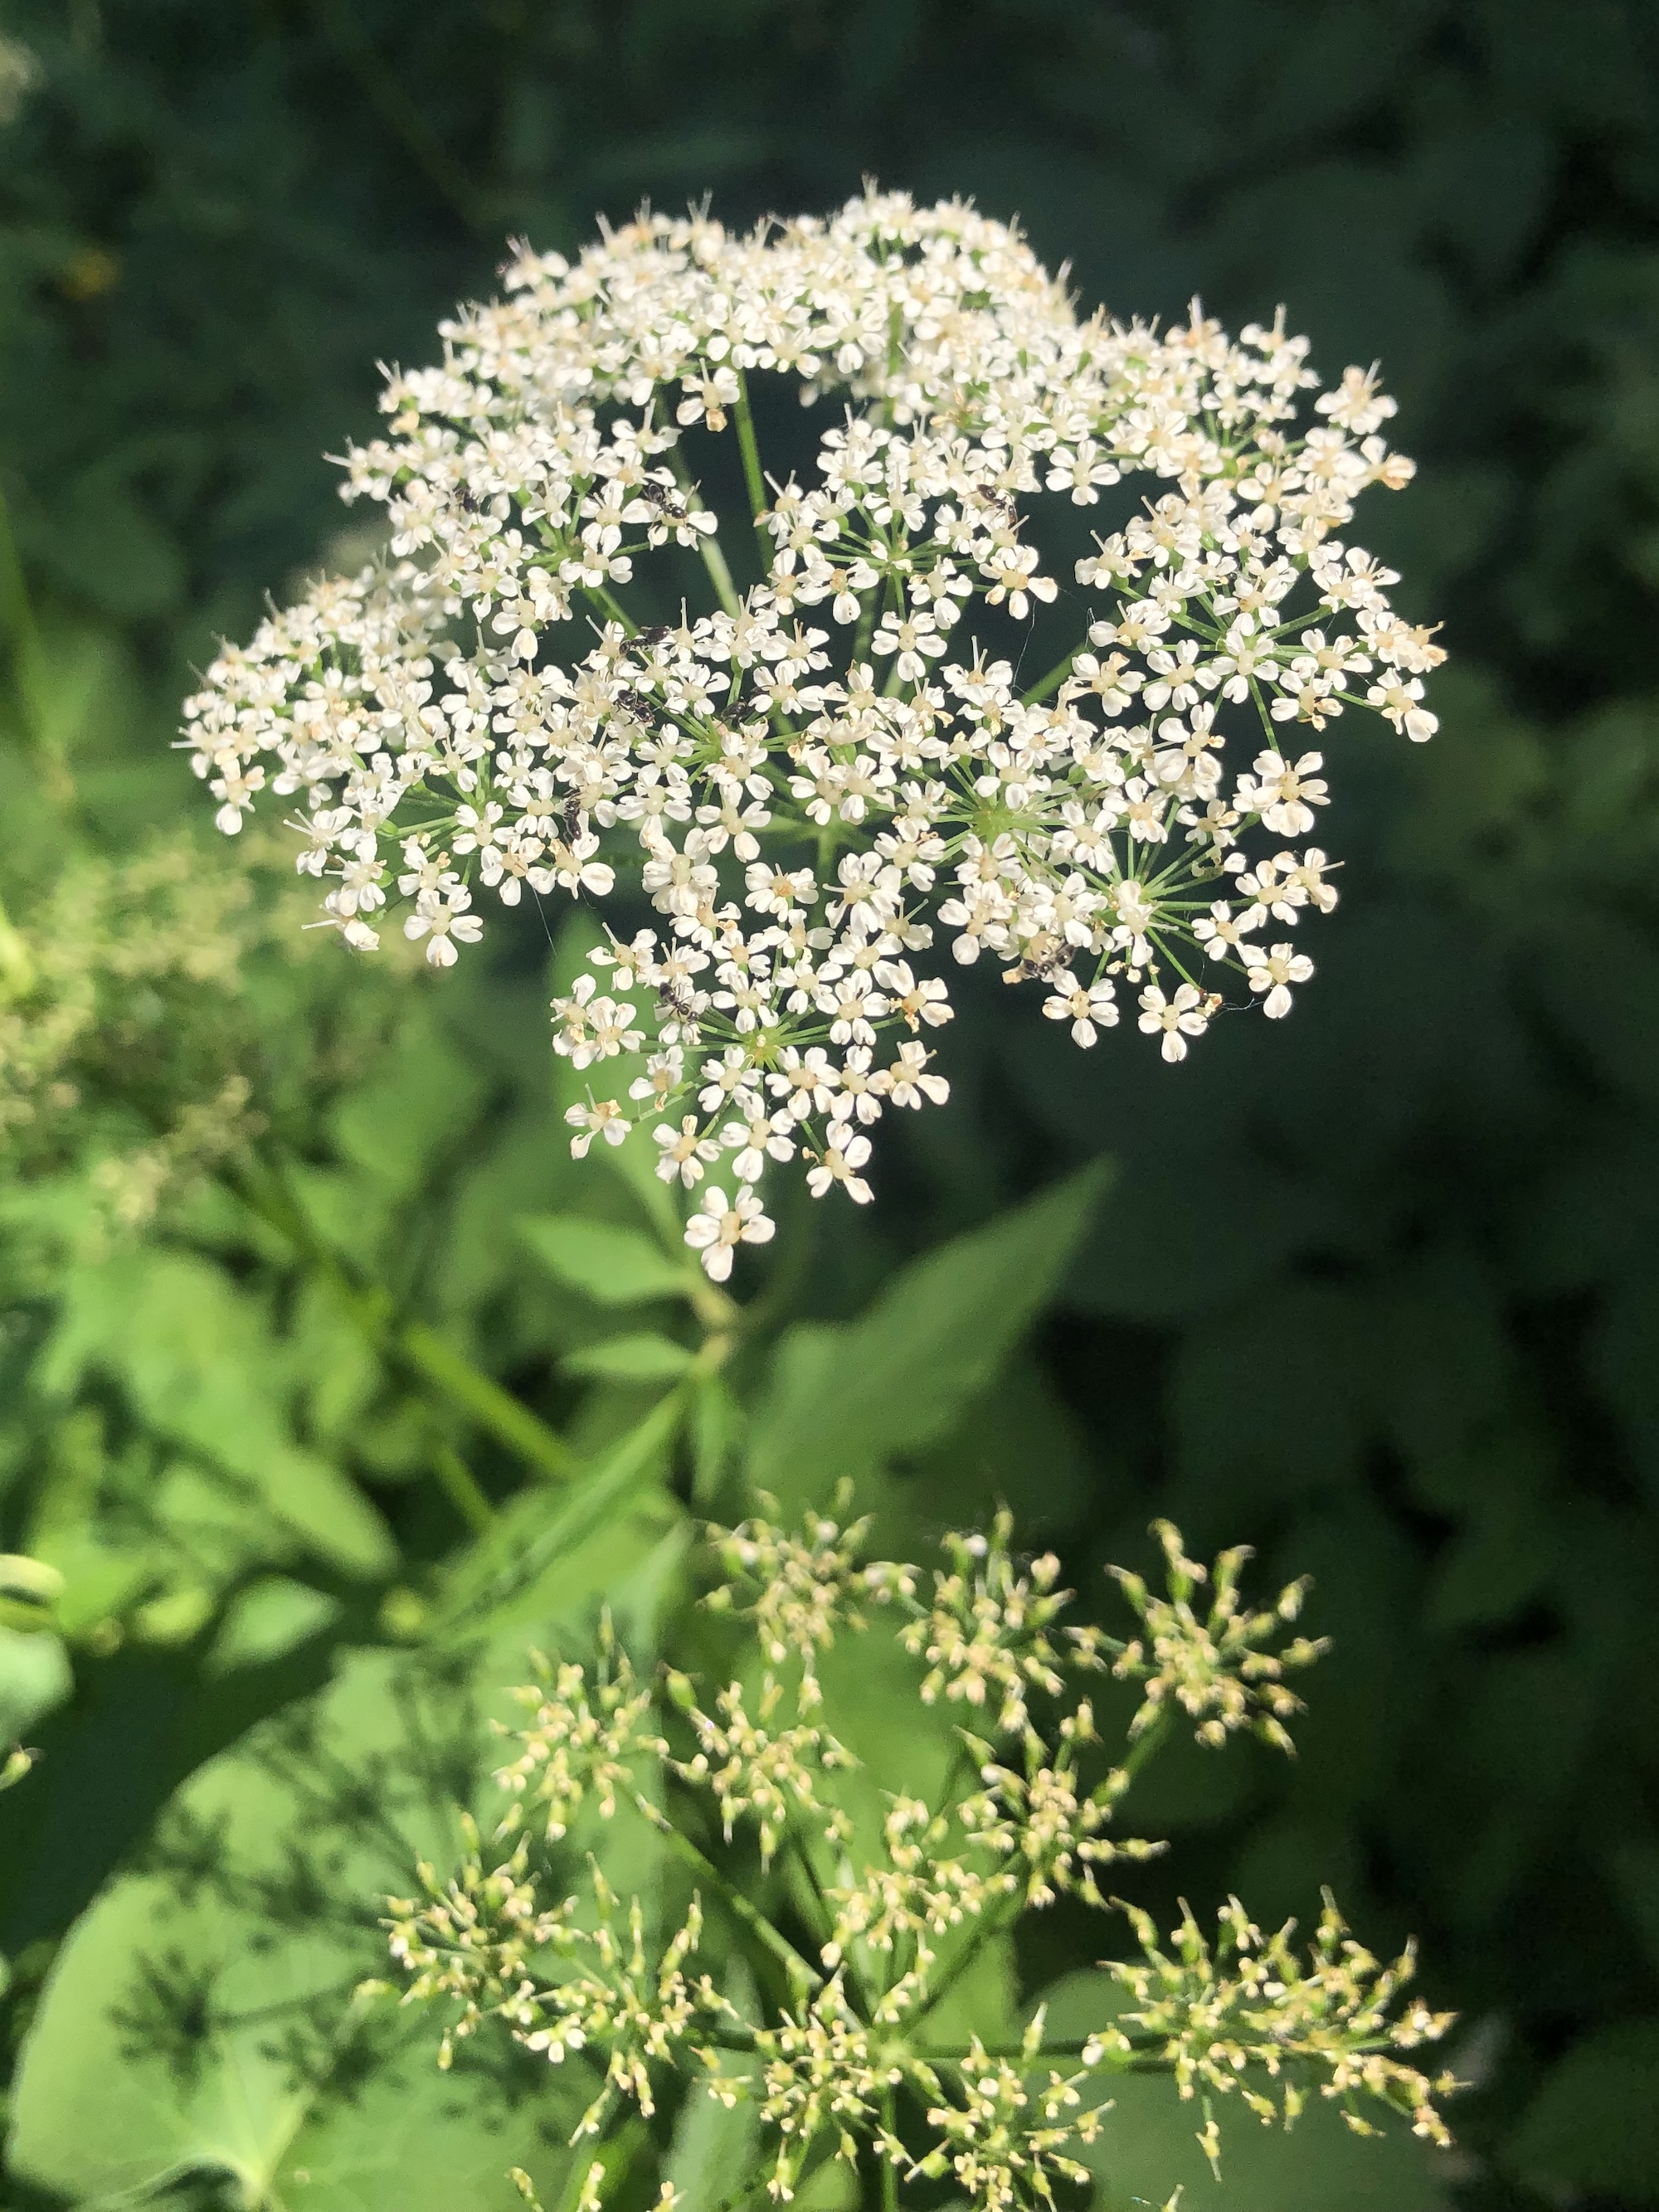 Goutweed along bike path behind Gregory Street in Madison, Wisconsin on June 24, 2022.